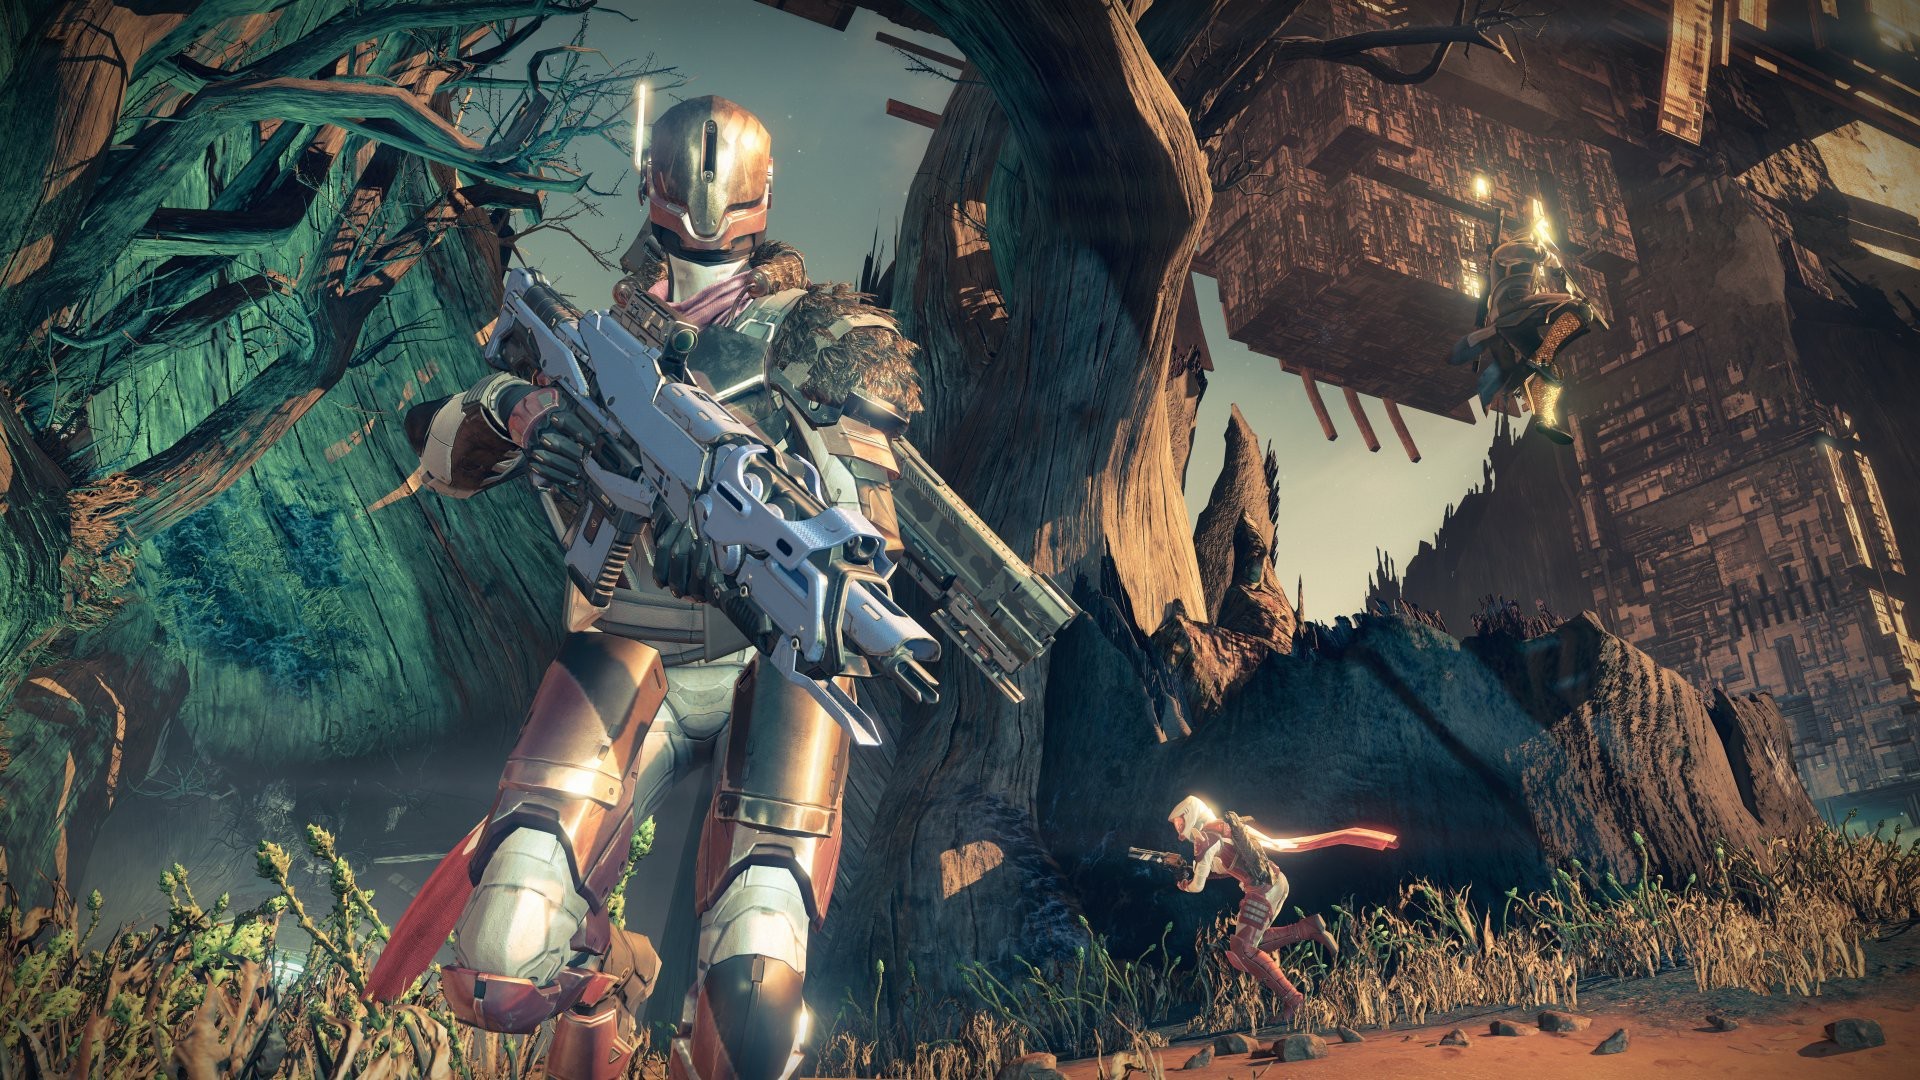 1920x1080 Conclusion: The Taken King is the missing piece to the puzzle Destiny has  sorely been in need of since launch. It's visible Bungie has been open to  fan ...